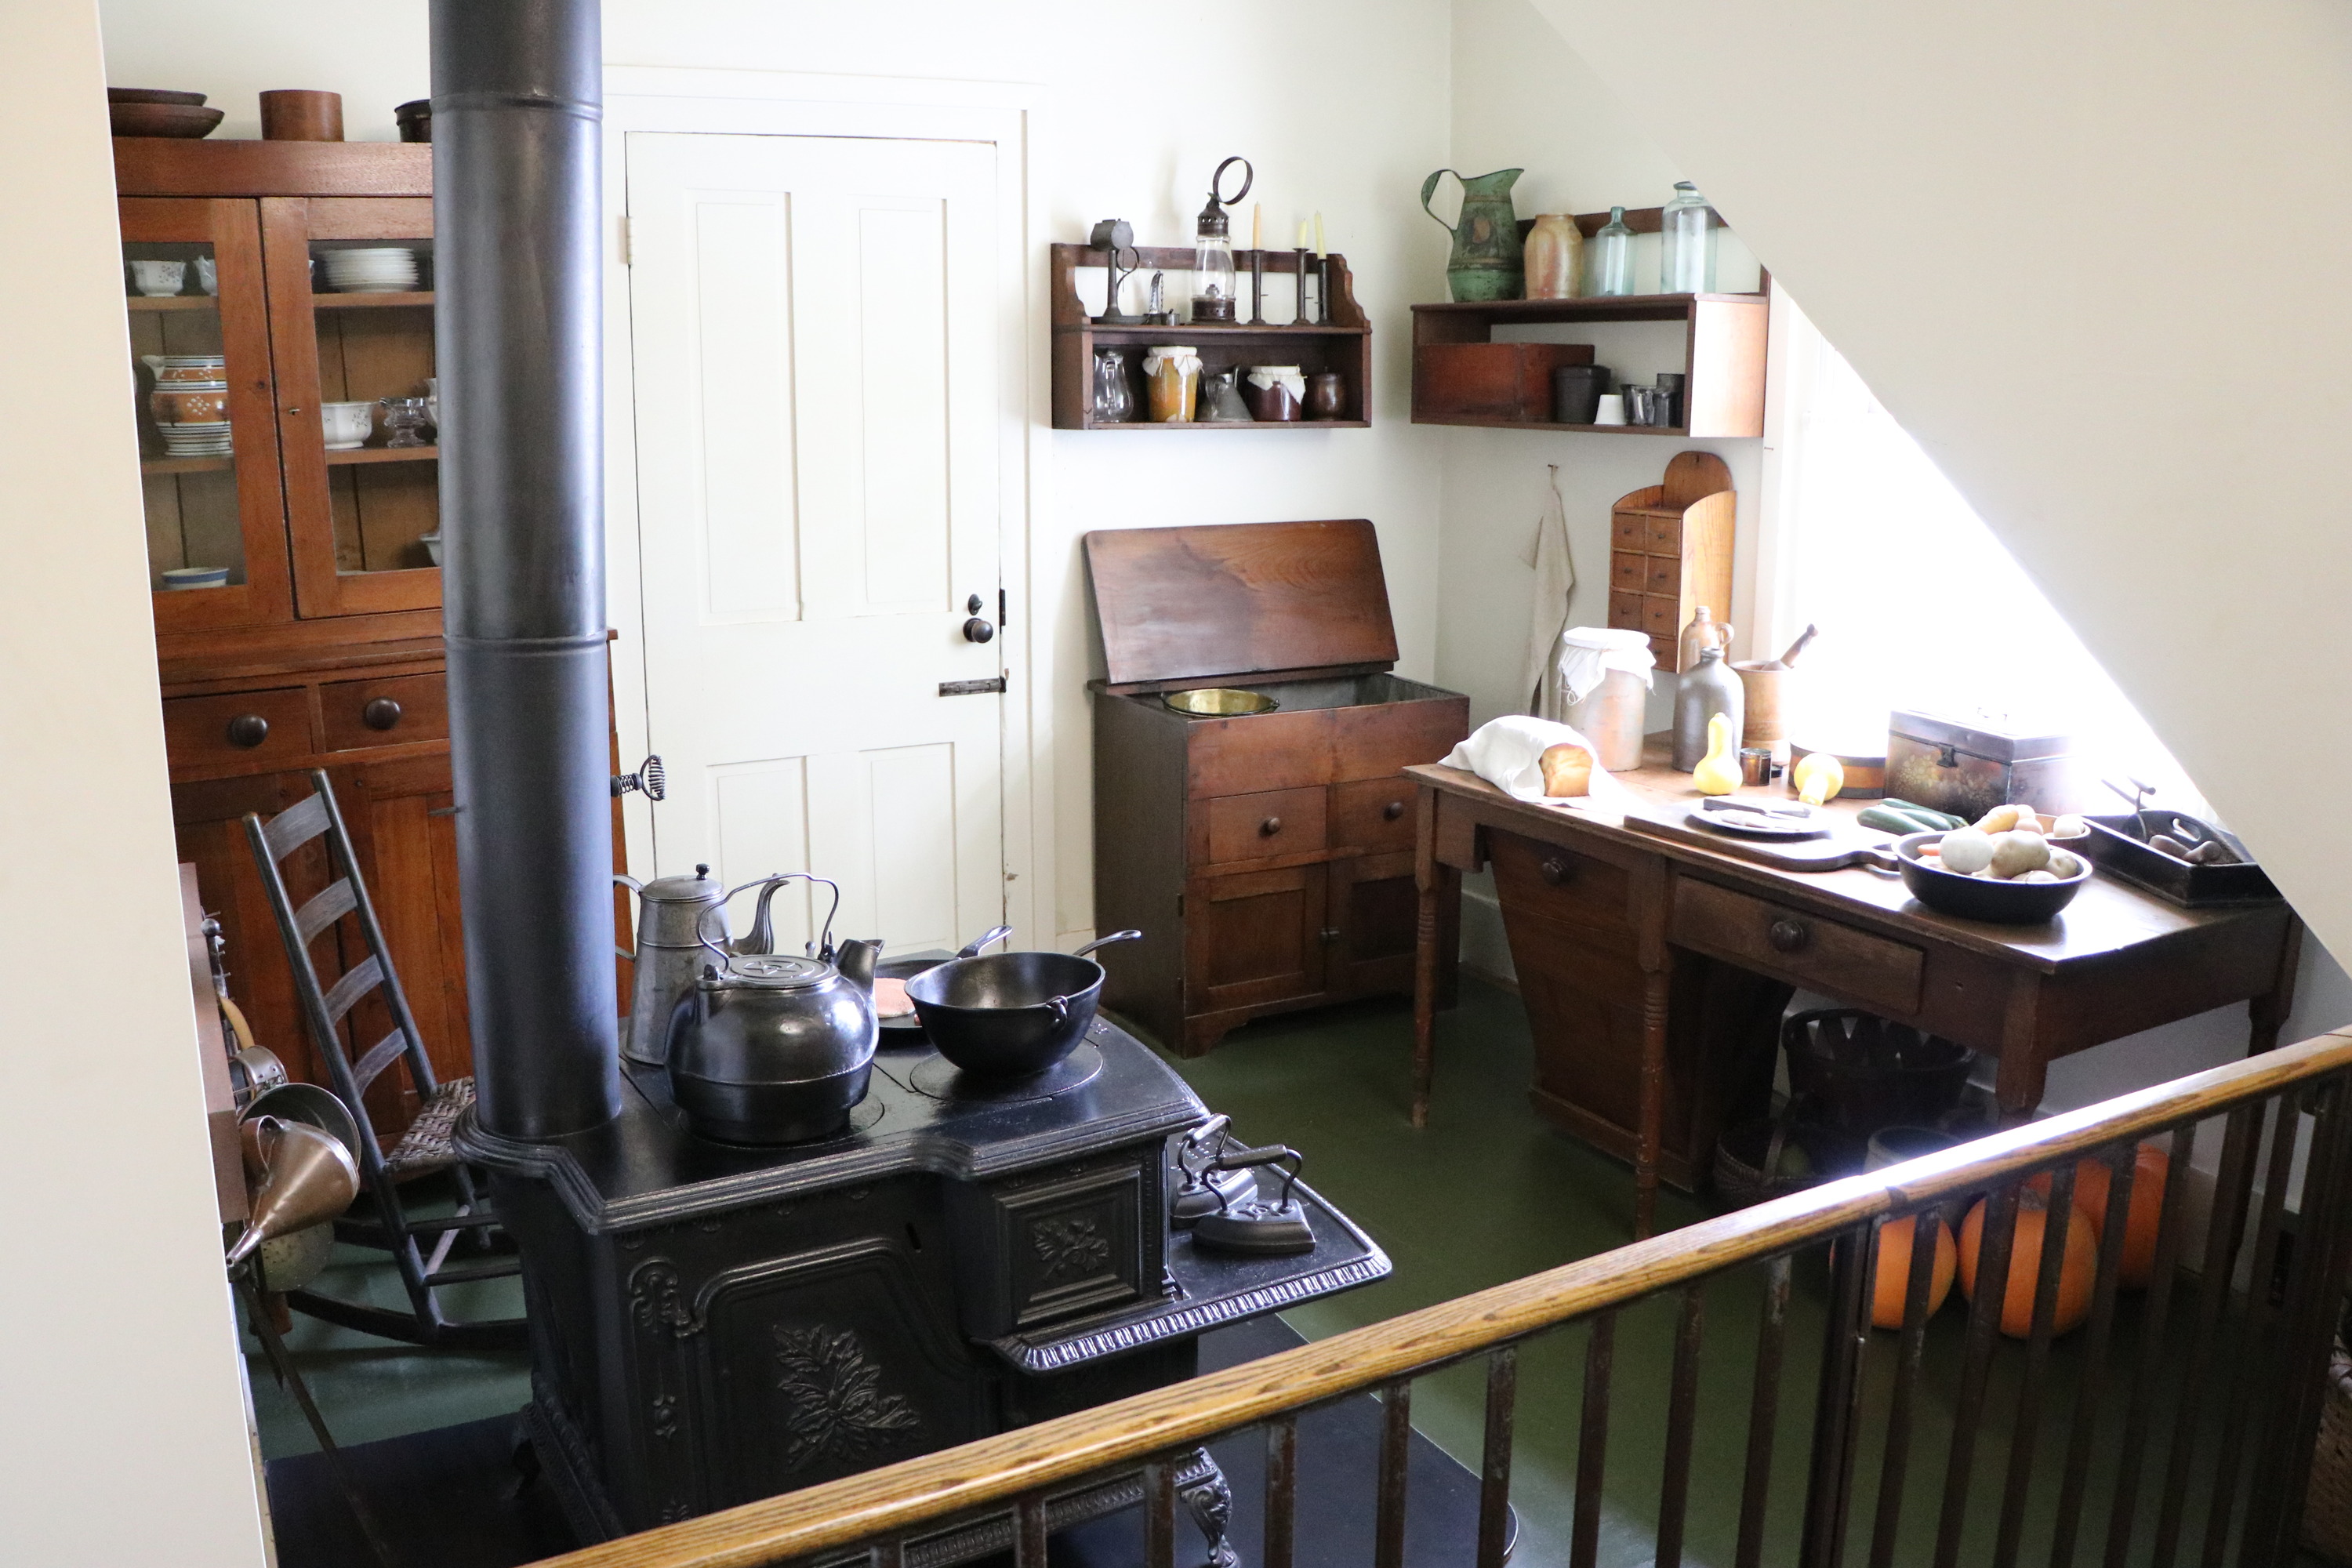 A small kitchen with a green floor, plain walls, wooden furniture, and a large cast iron stove.